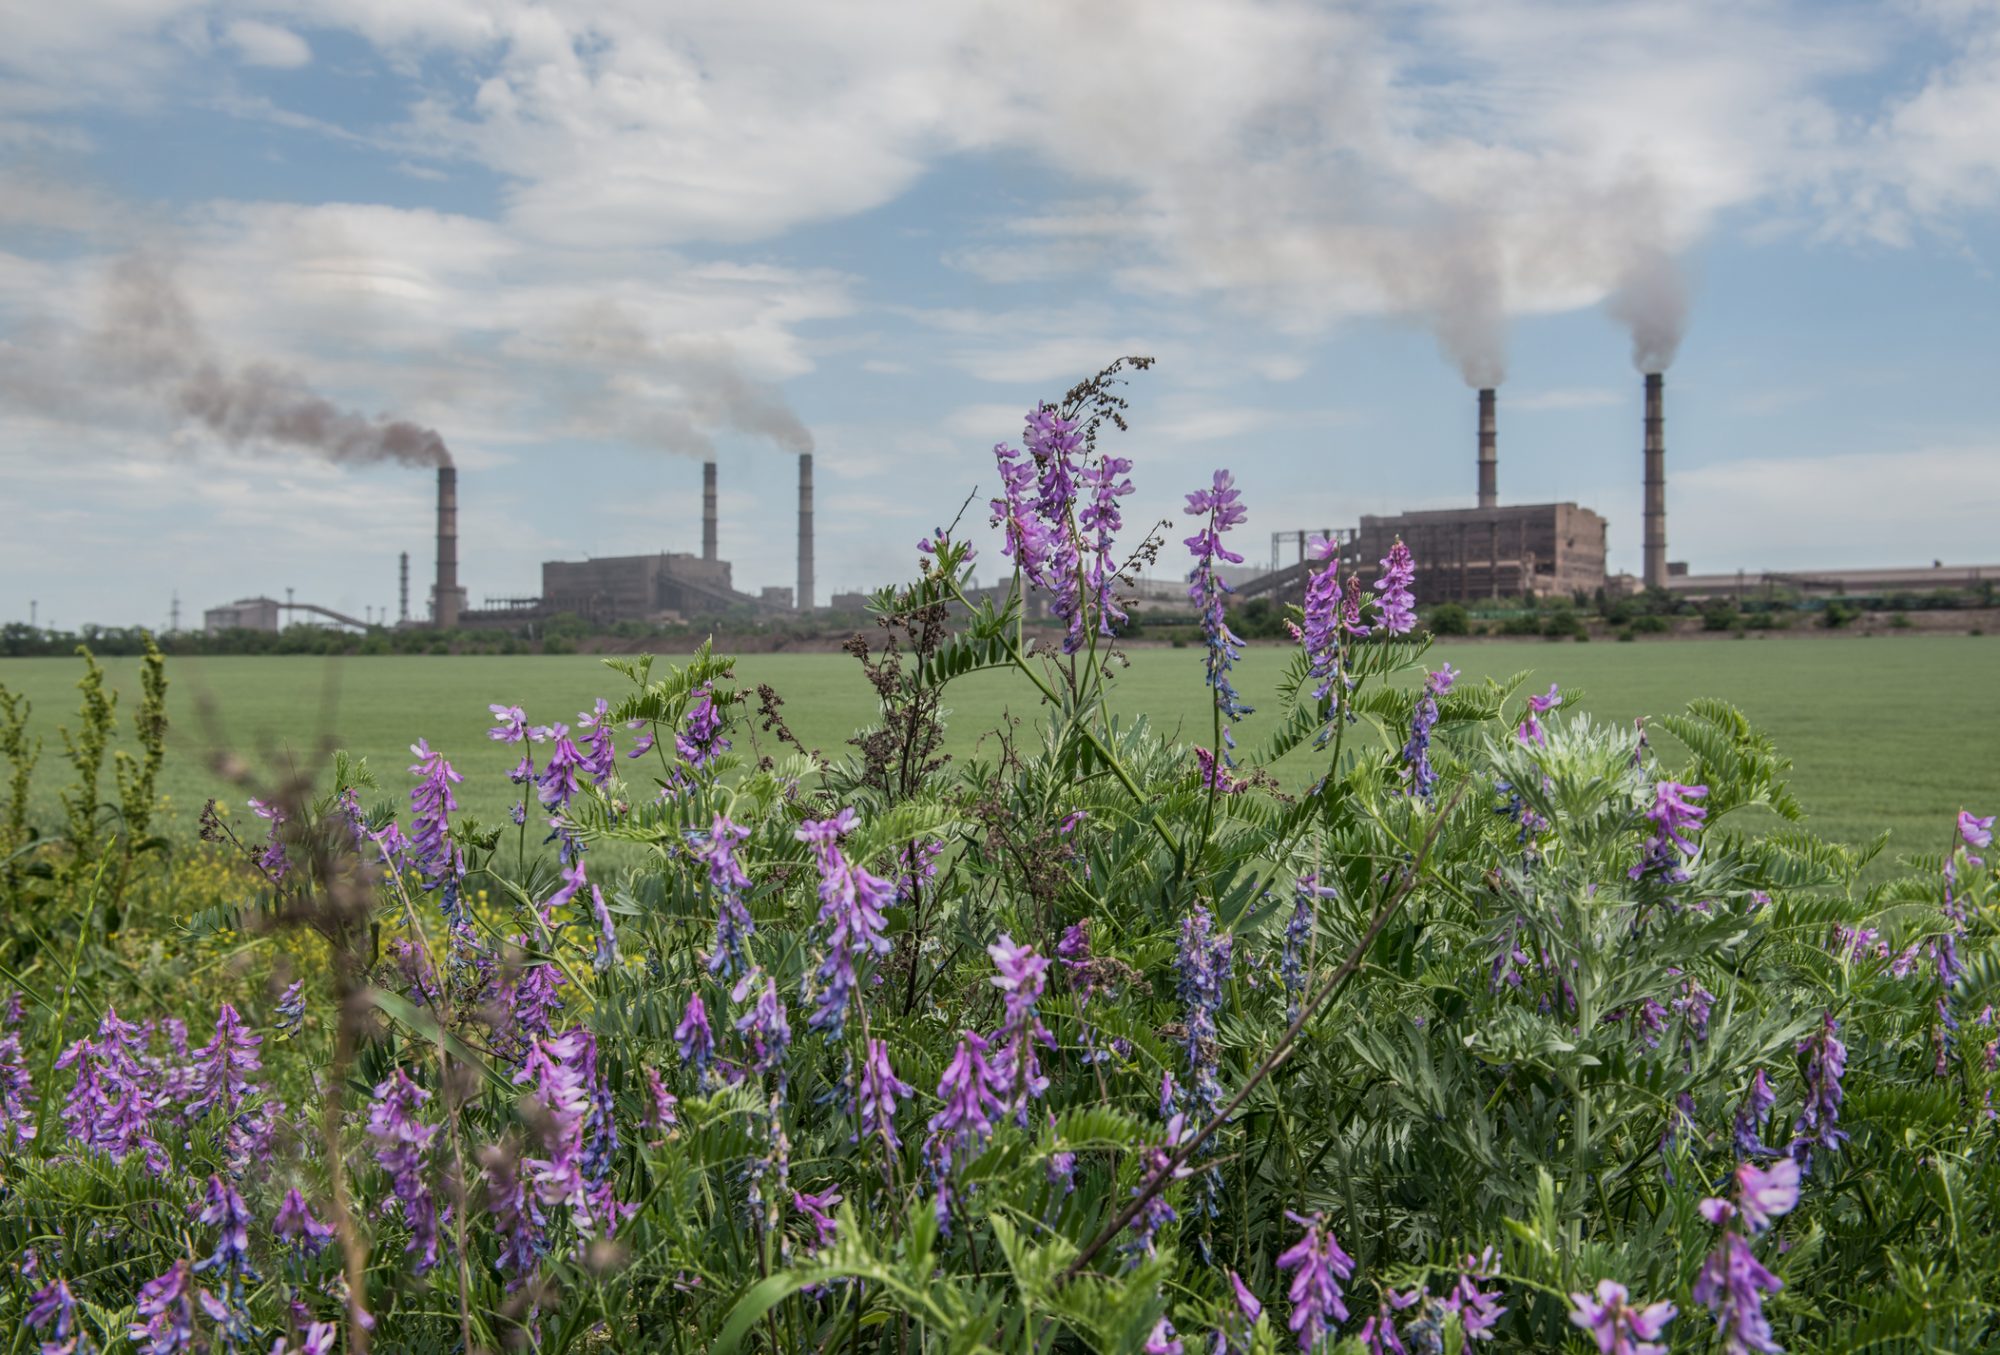 Insects provide pollination of important food crops and native wildflowers, but researchers sought to understand how air pollution affects different p